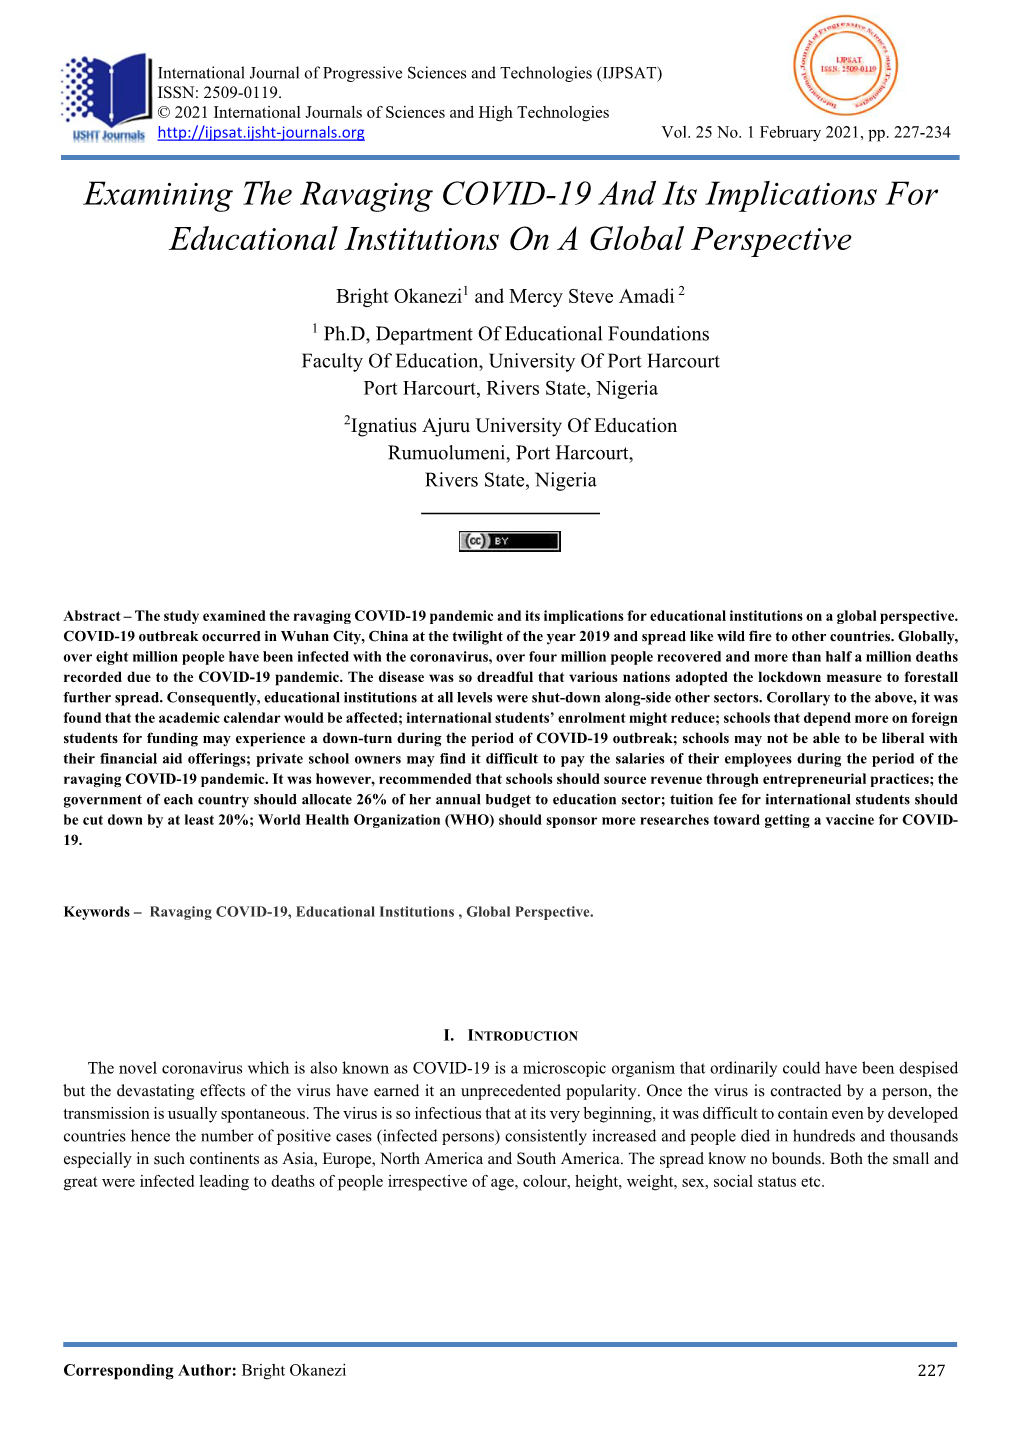 Examining the Ravaging COVID-19 and Its Implications for Educational Institutions on a Global Perspective